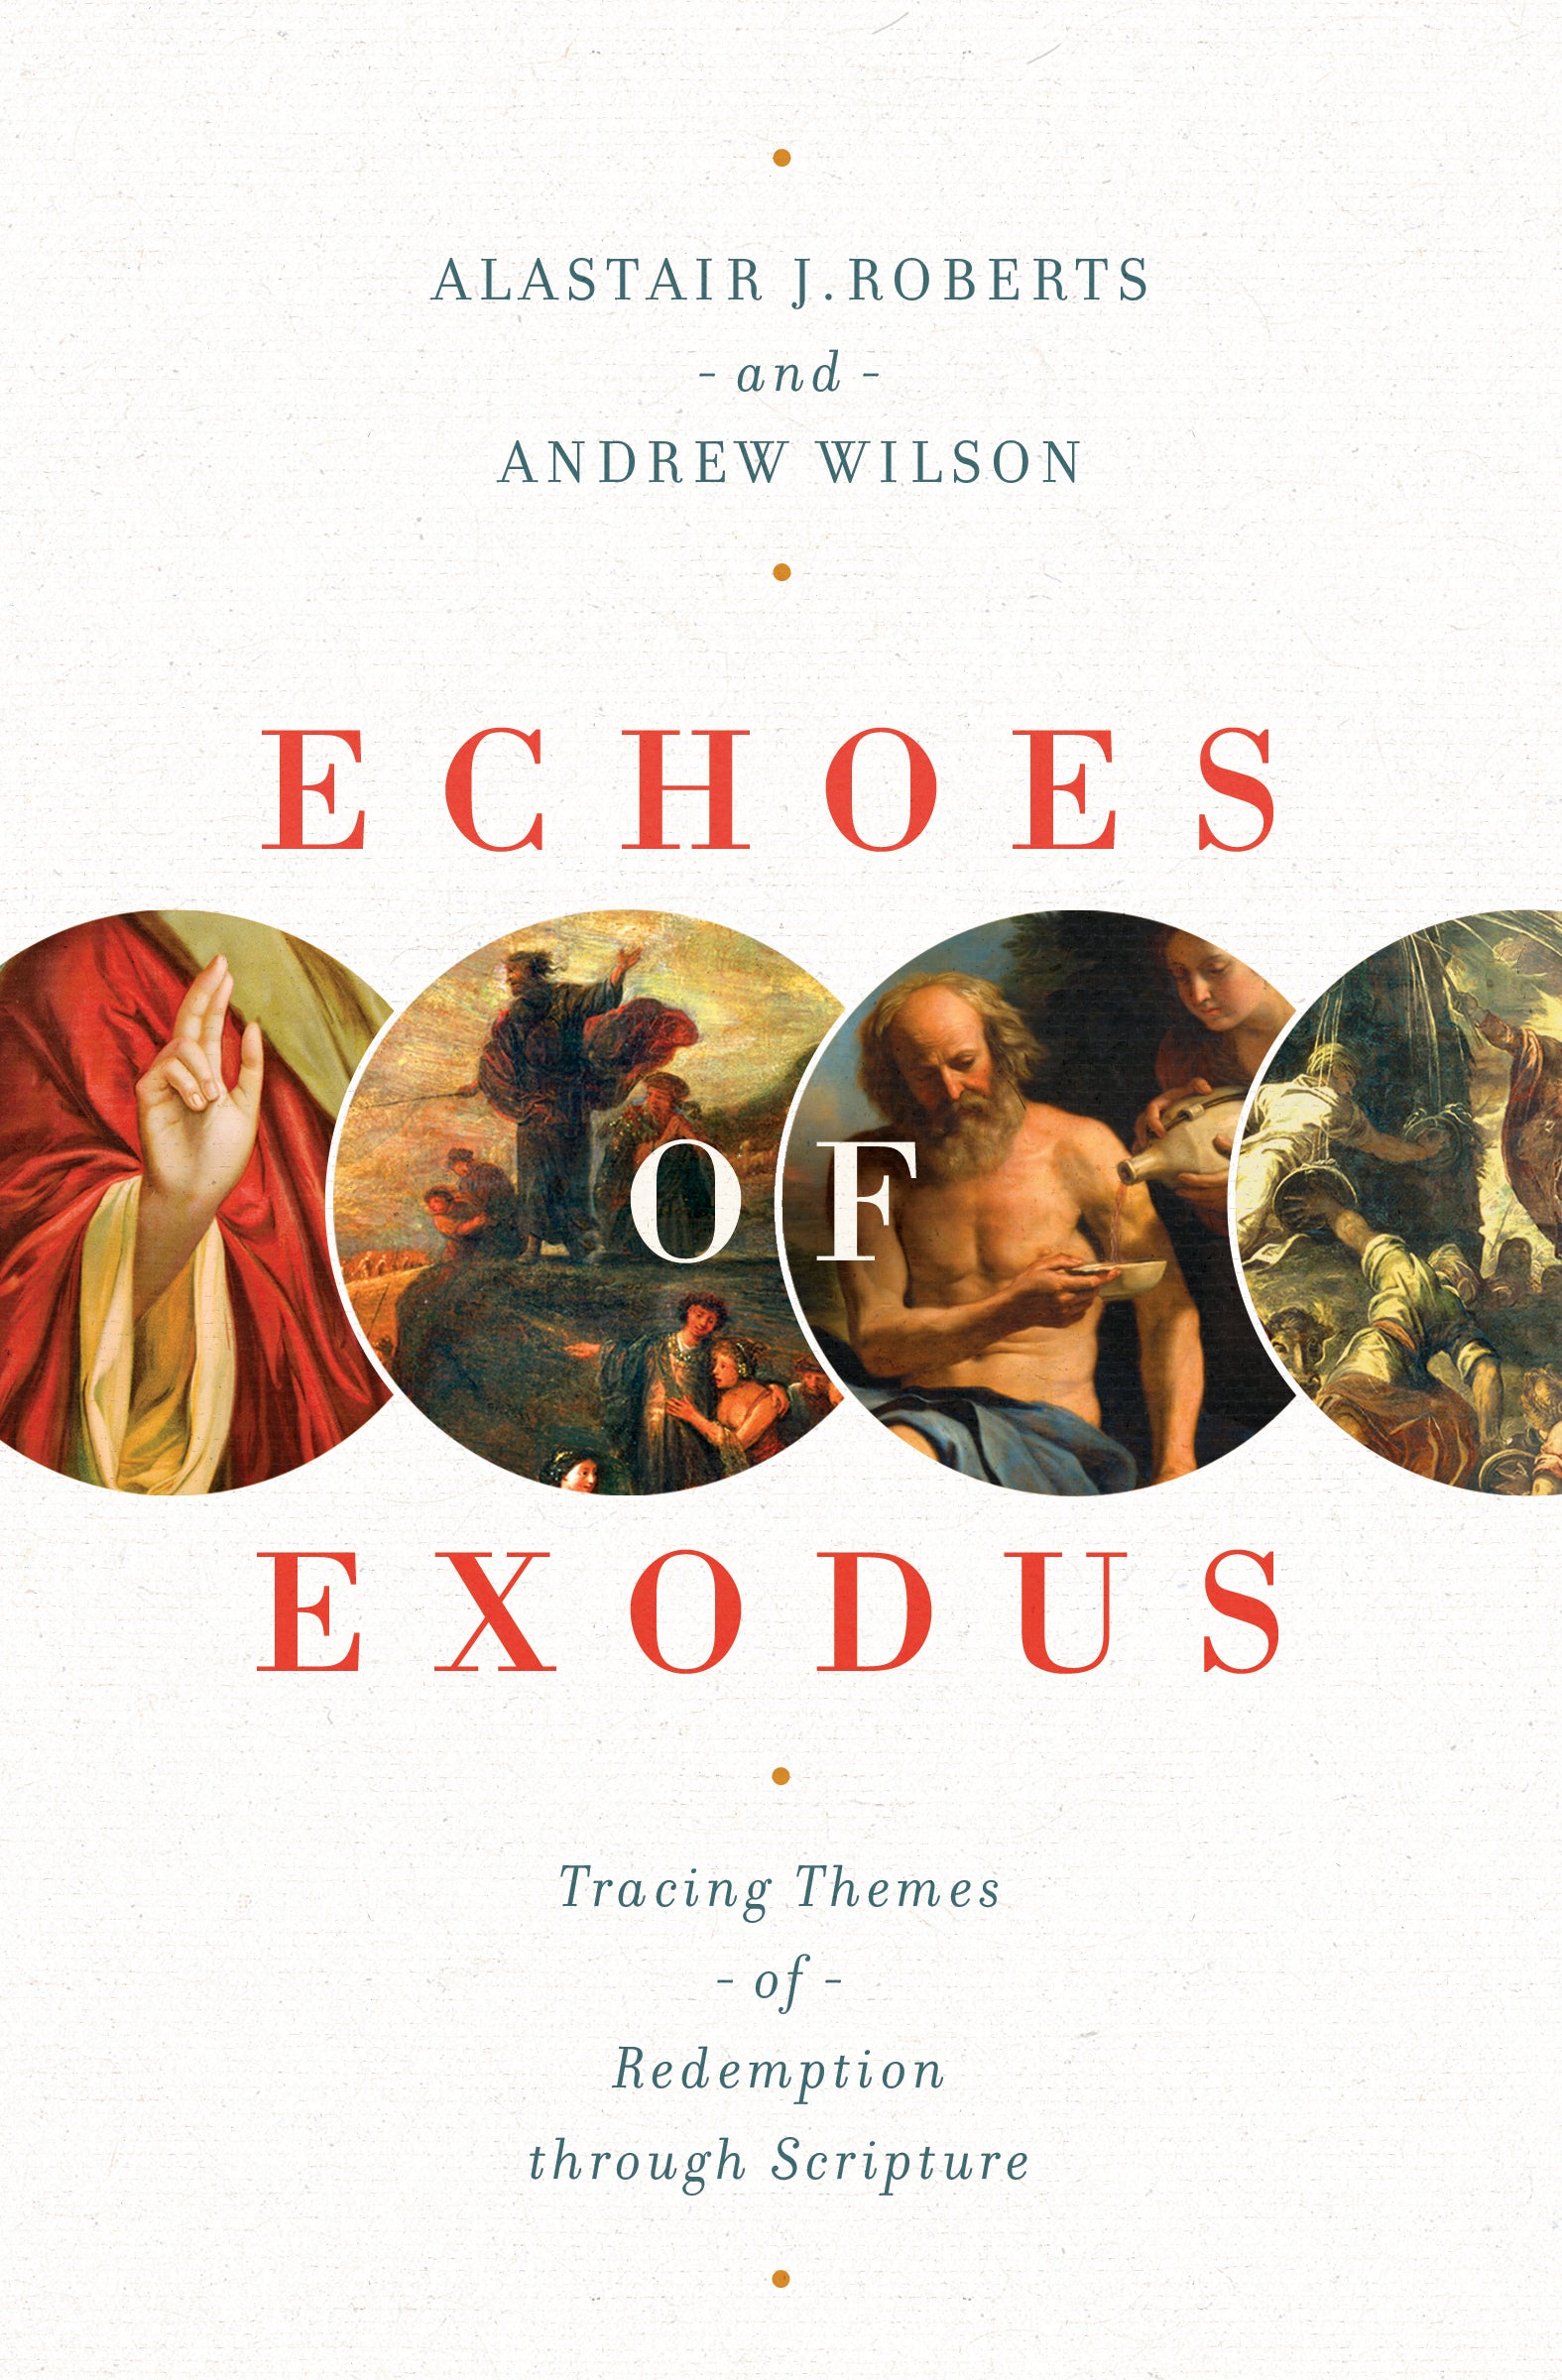 Image of Echoes of Exodus other